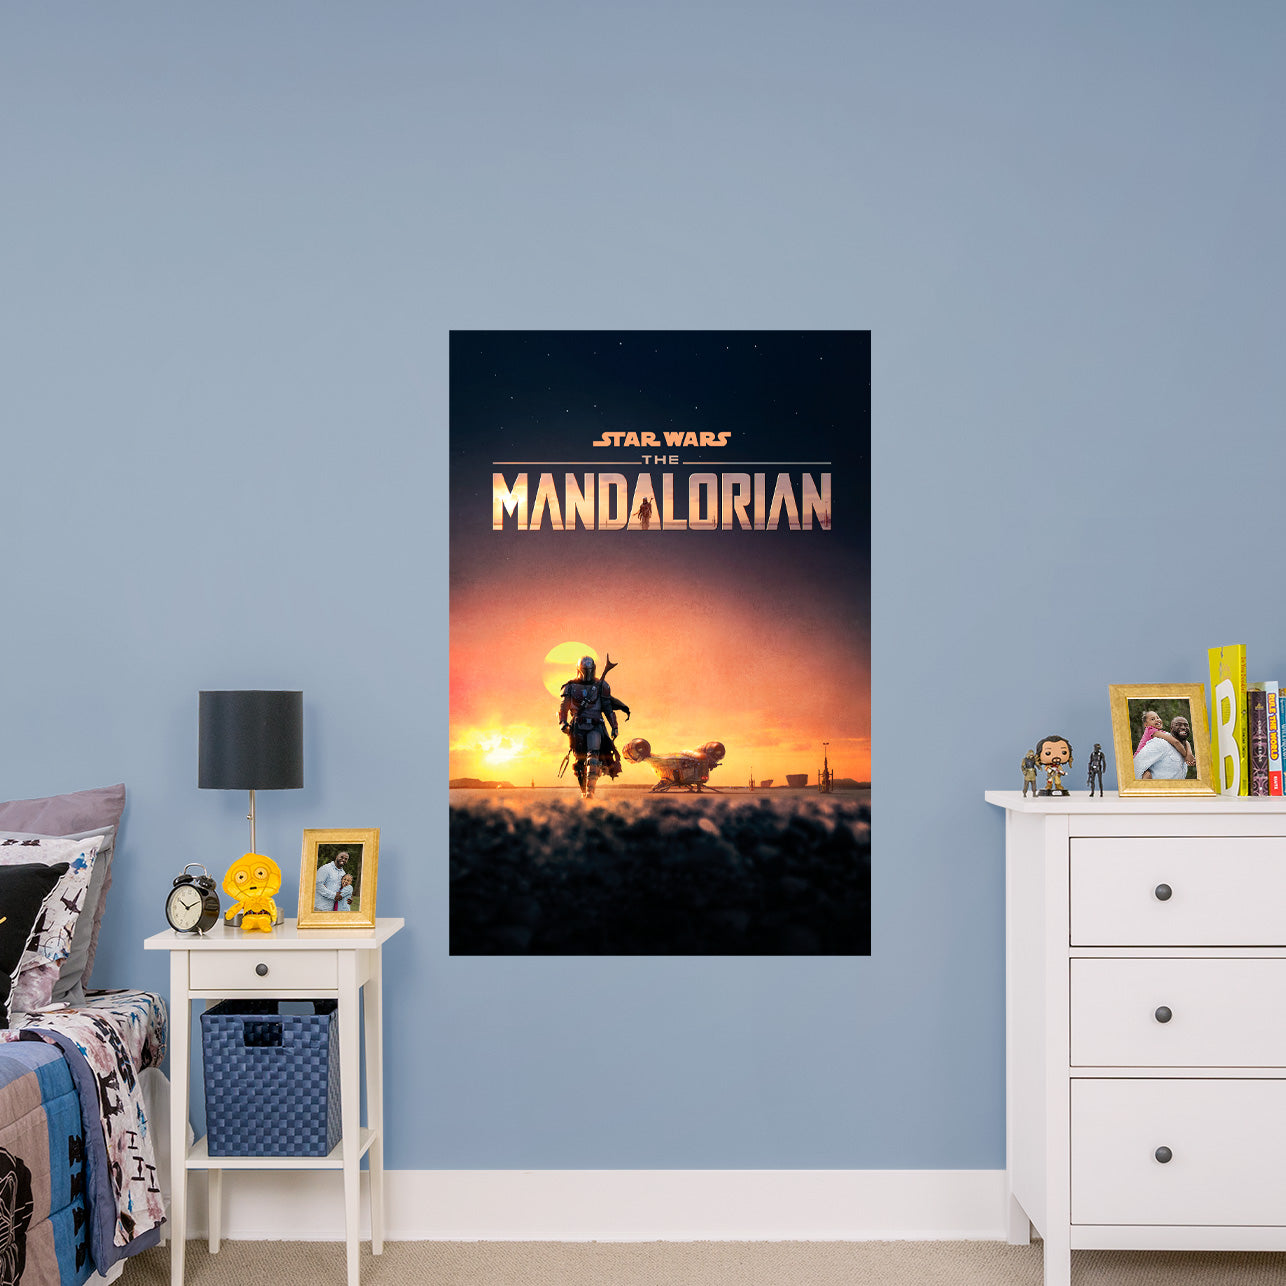 The Mandalorian: The Mandalorian Razor Crest Poster - Officially Licensed Star Wars Removable Adhesive Decal